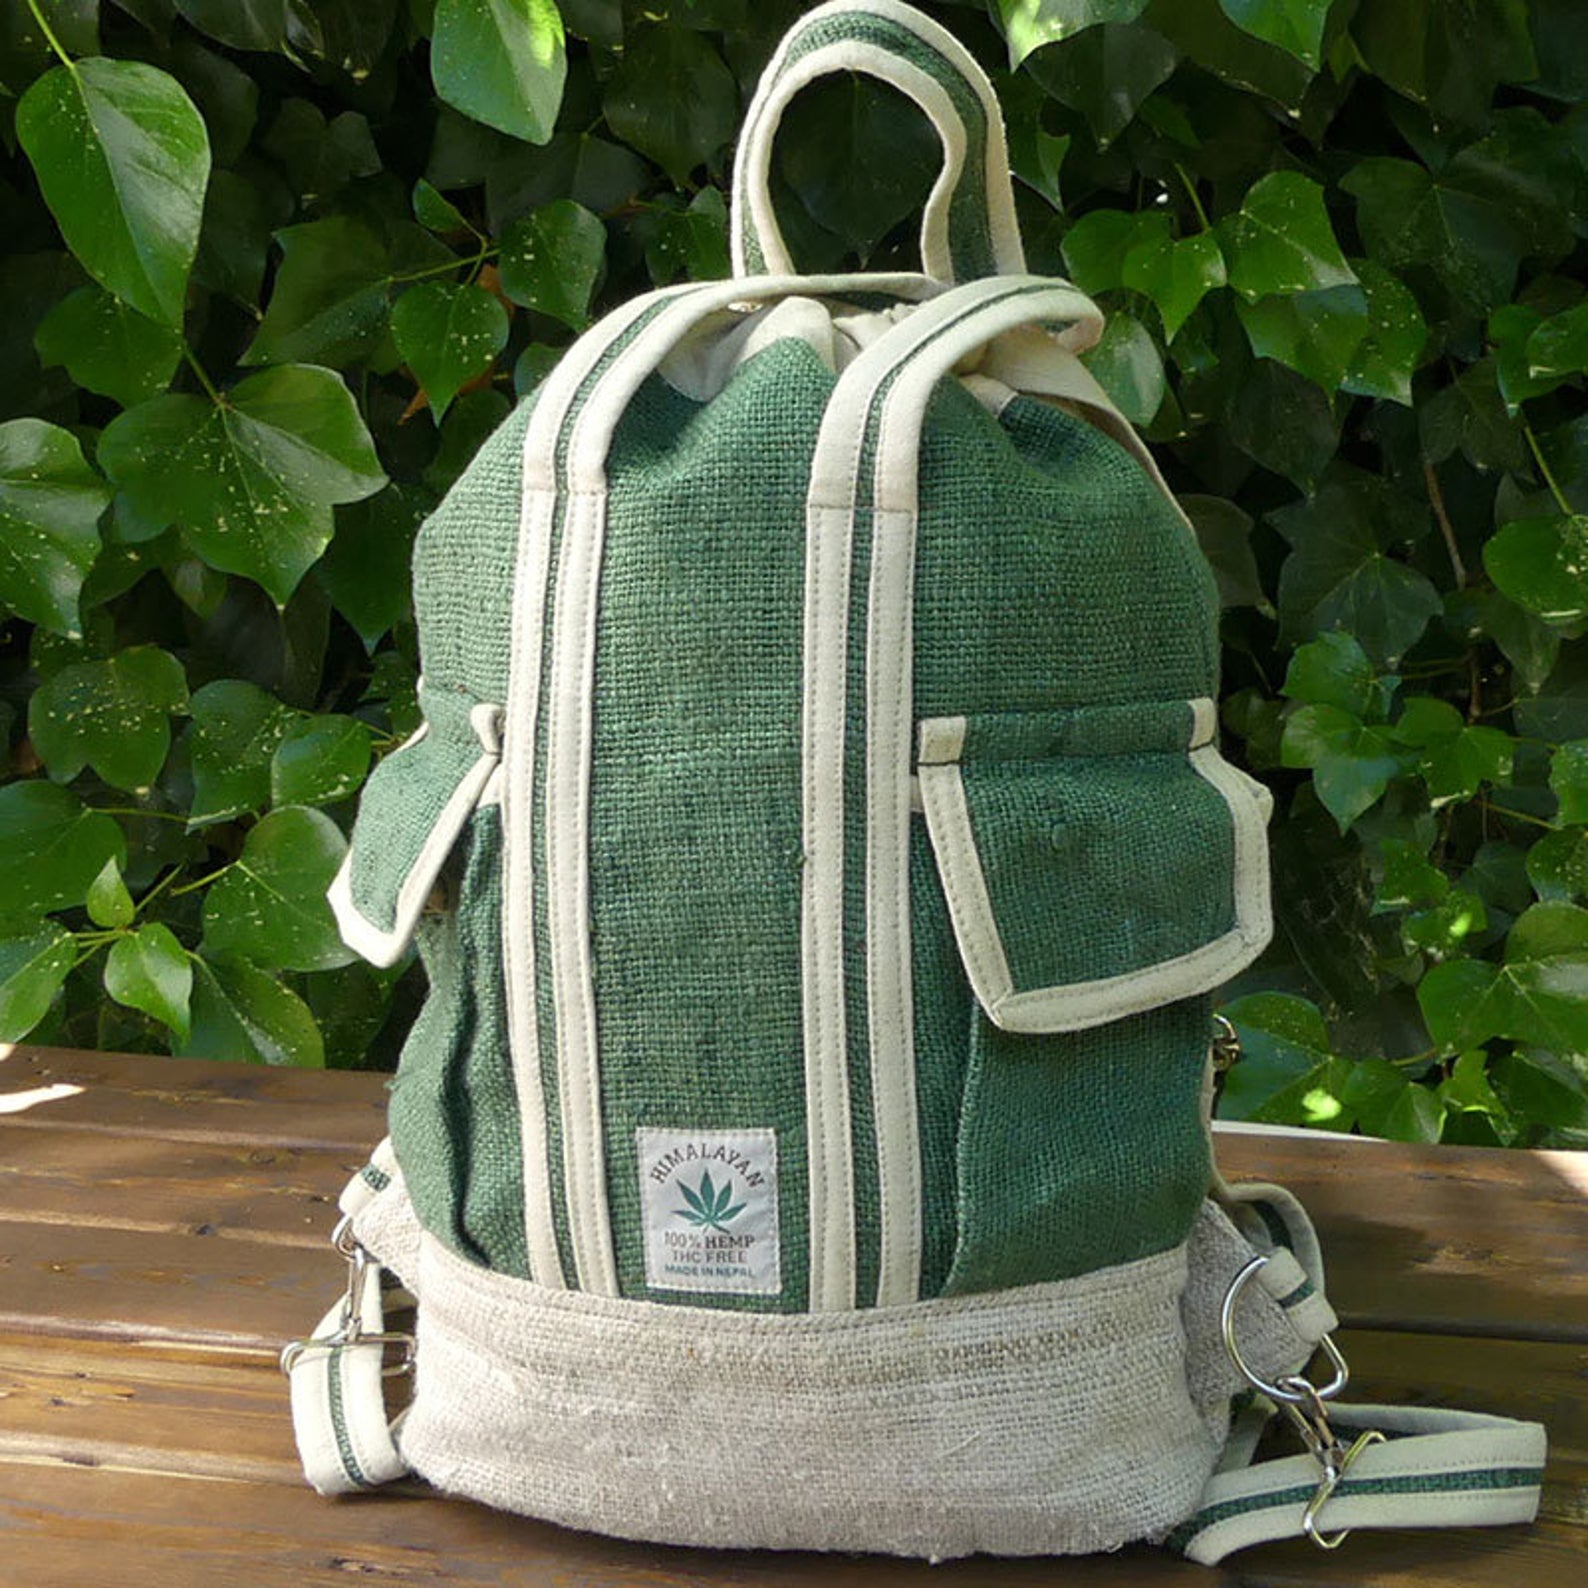 A backpack list for any taste